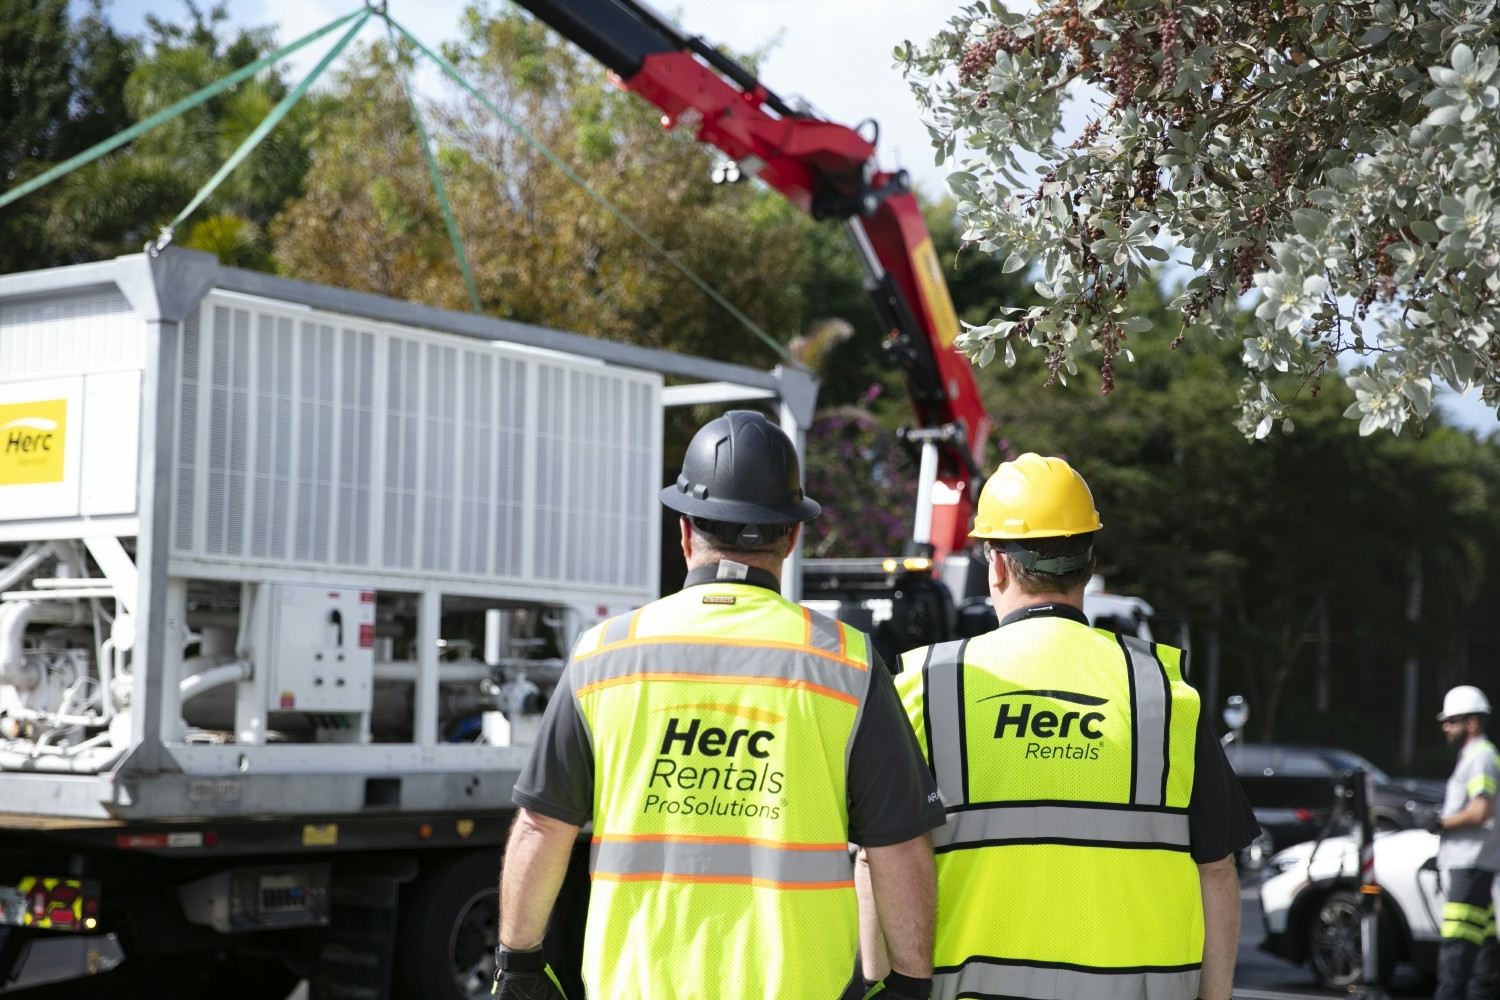 At Herc Rentals, our purpose is to equip customers and communities to build a brighter future. 